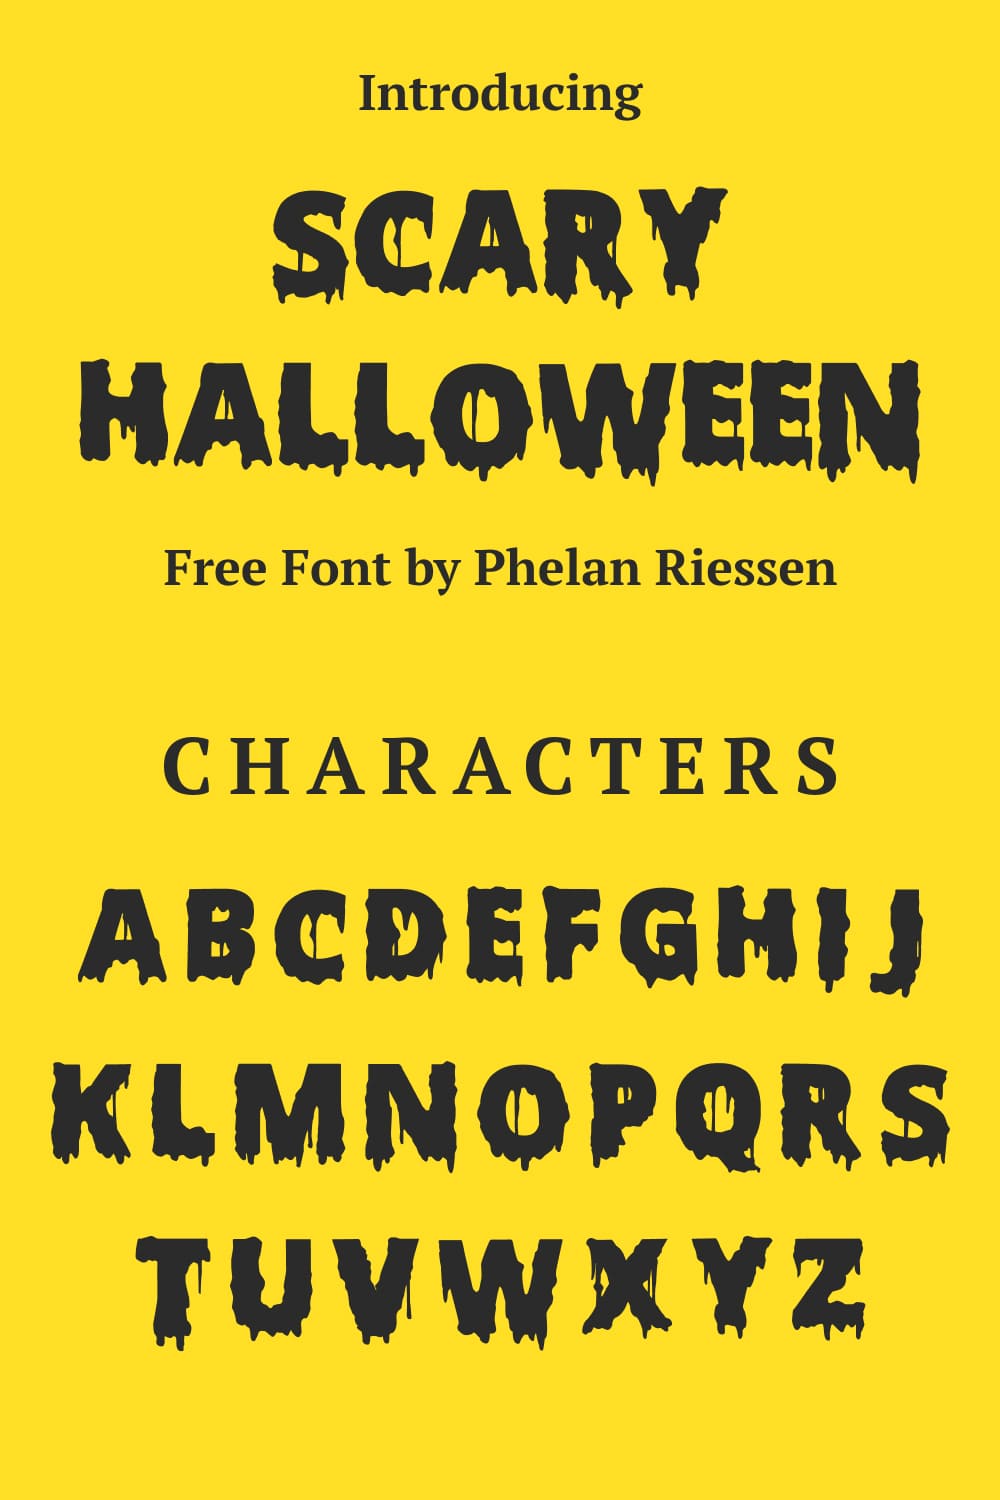 Scary Halloween Font.